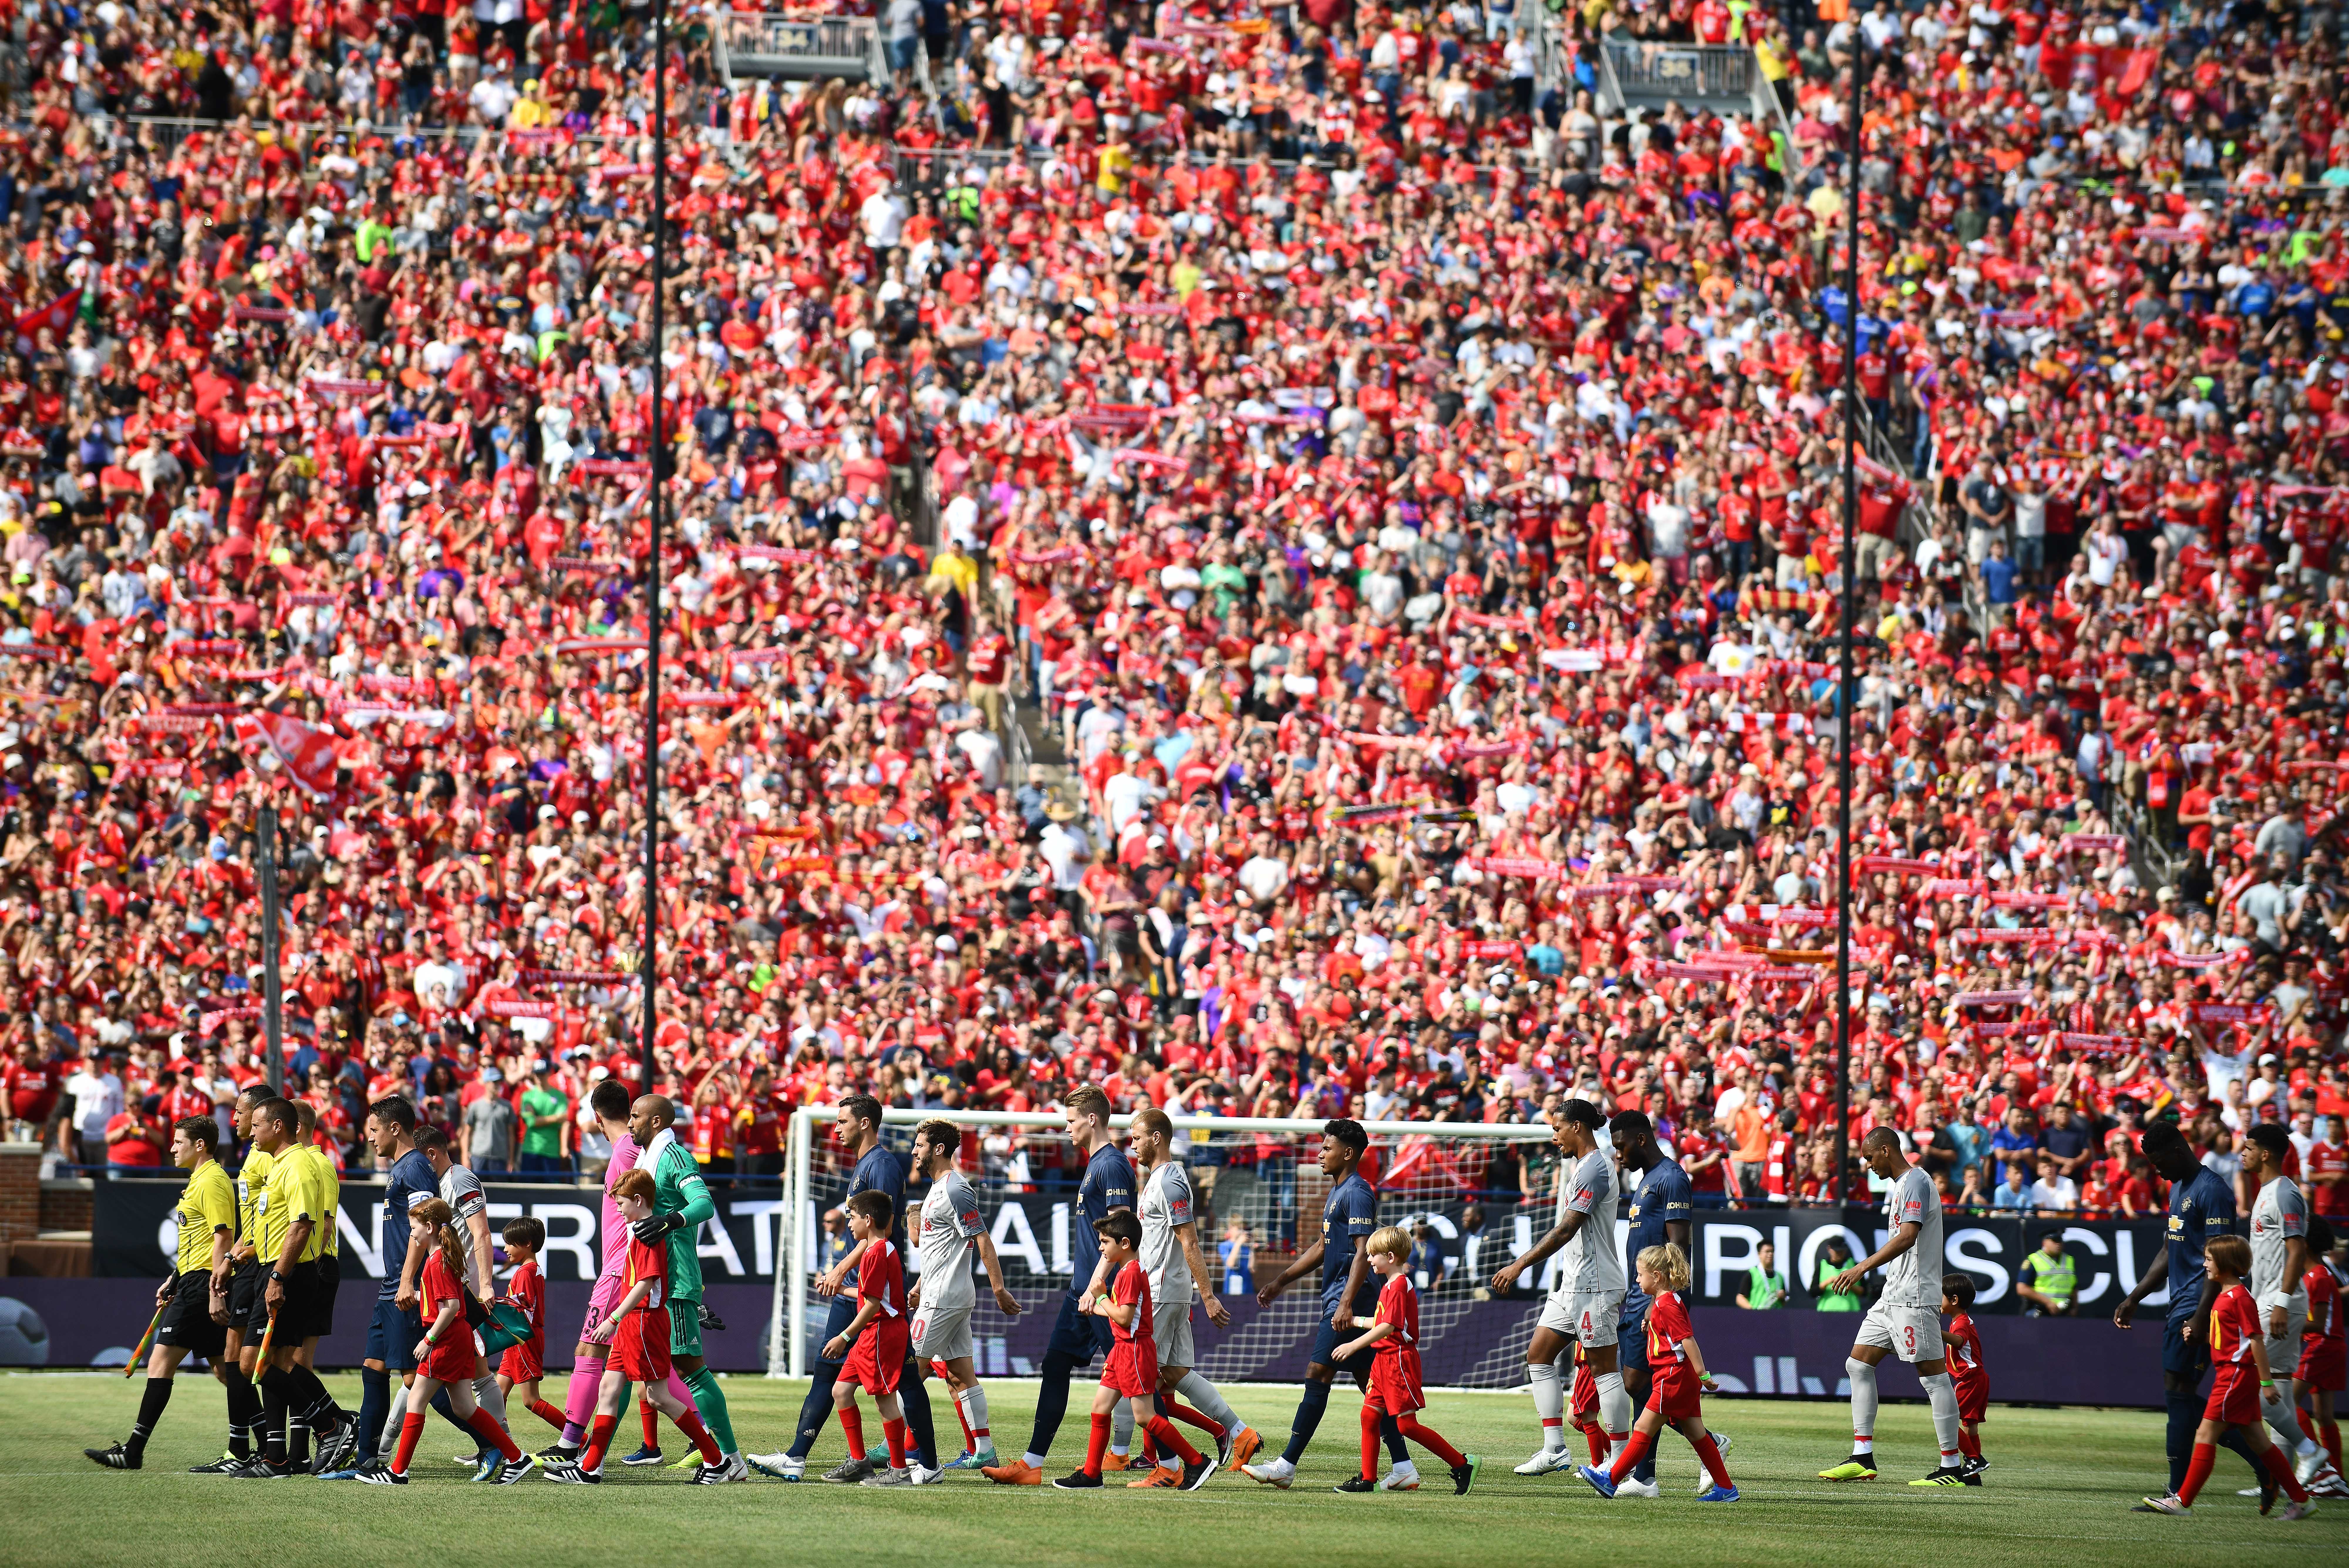 Manchester United and Liverpool make their way onto the field as over 100,000 fans cheer them on at The Big House.